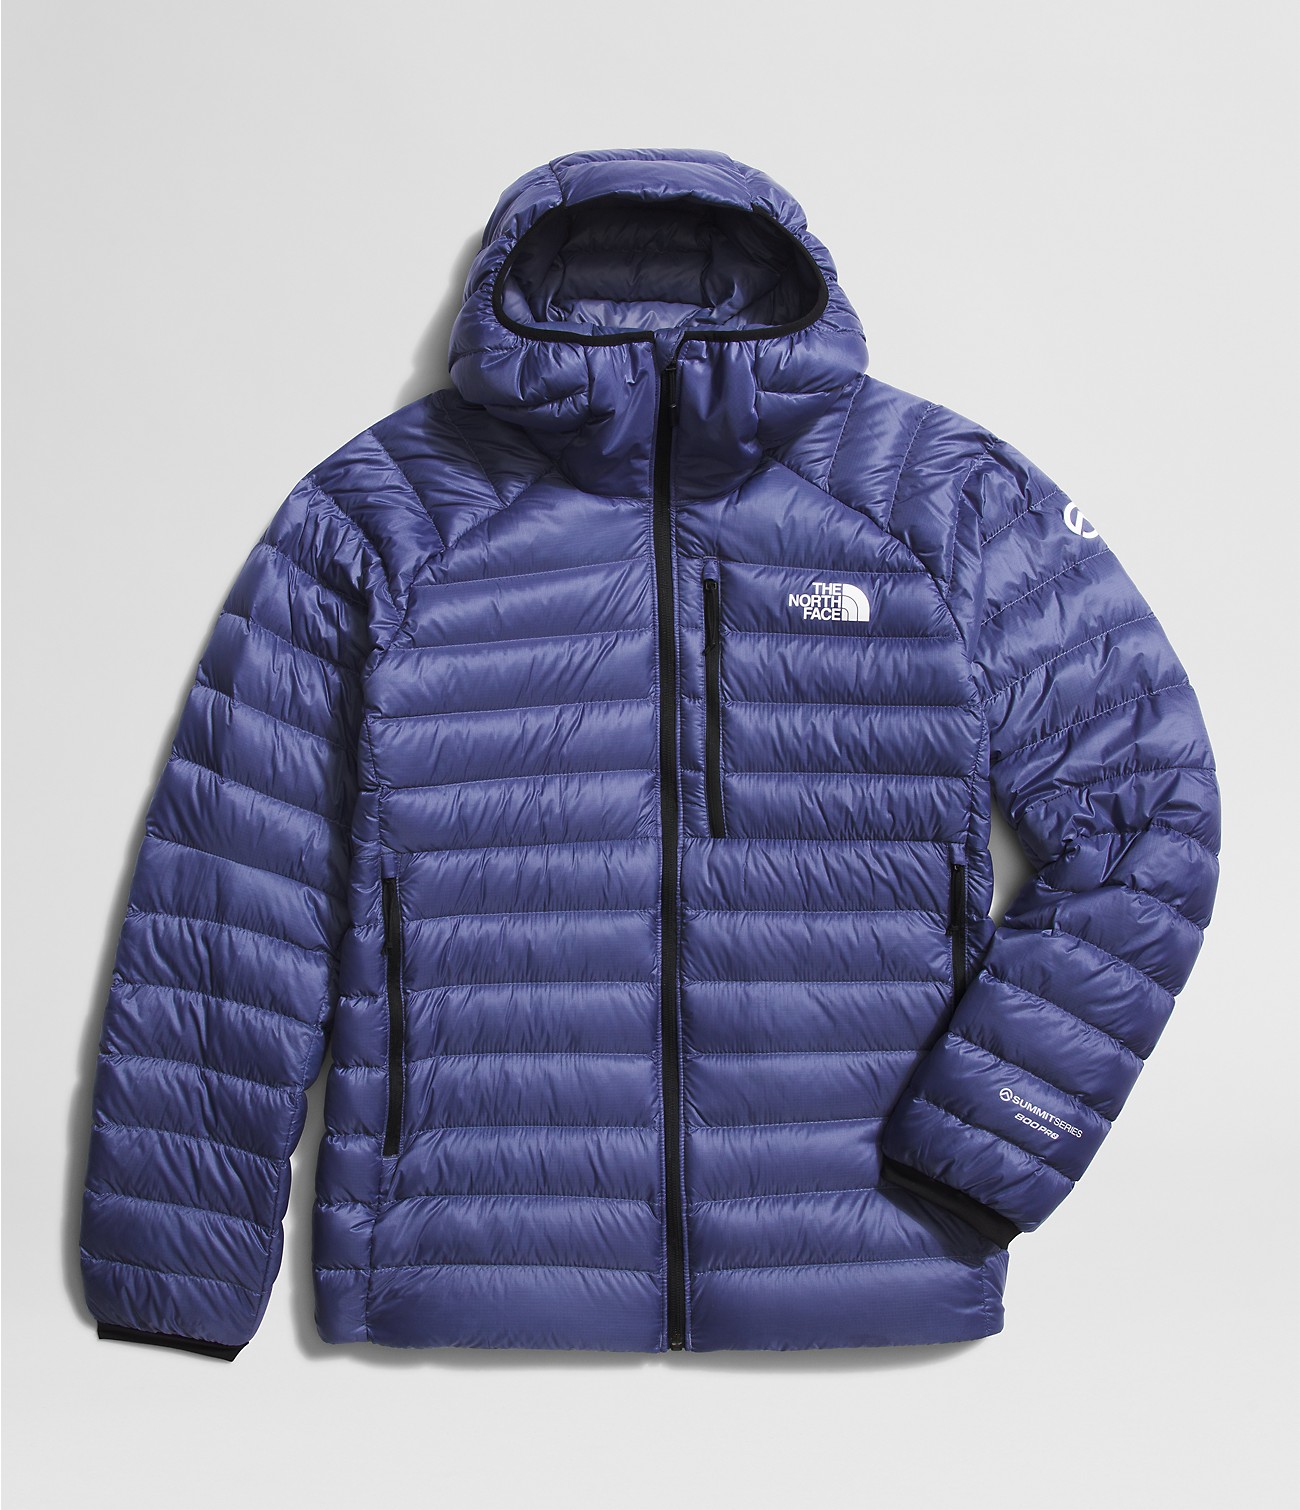 Unlock Wilderness' choice in the Montbell Vs North Face comparison, the Summit Series Breithorn Hoodie by The North Face